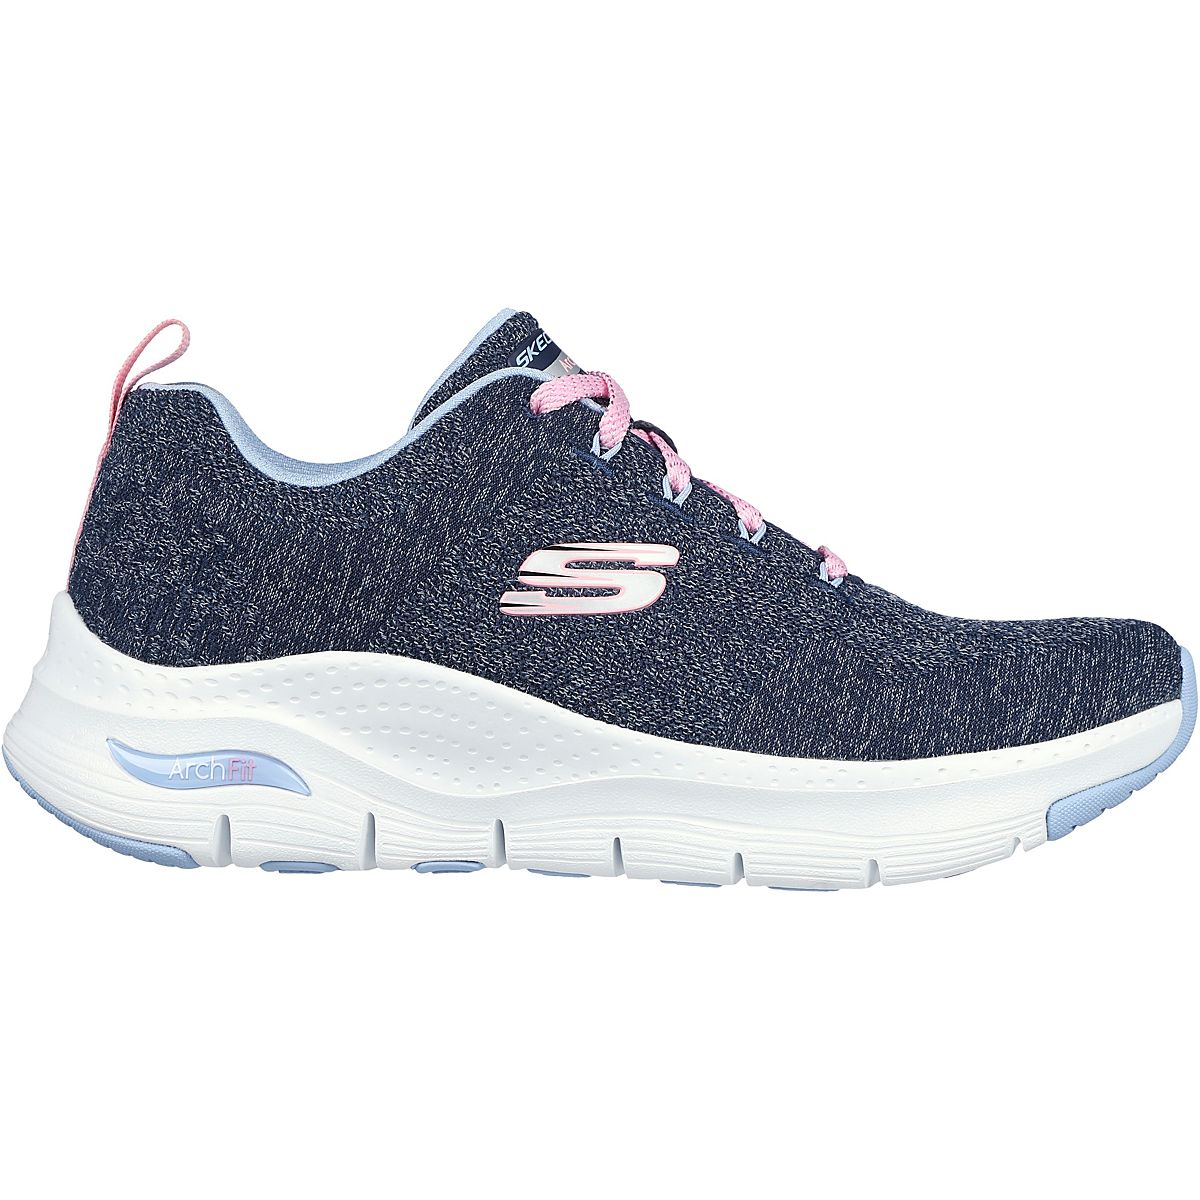 salaris Kilauea Mountain nevel SKECHERS Women's Arch Fit Comfy Wave Shoes | Academy